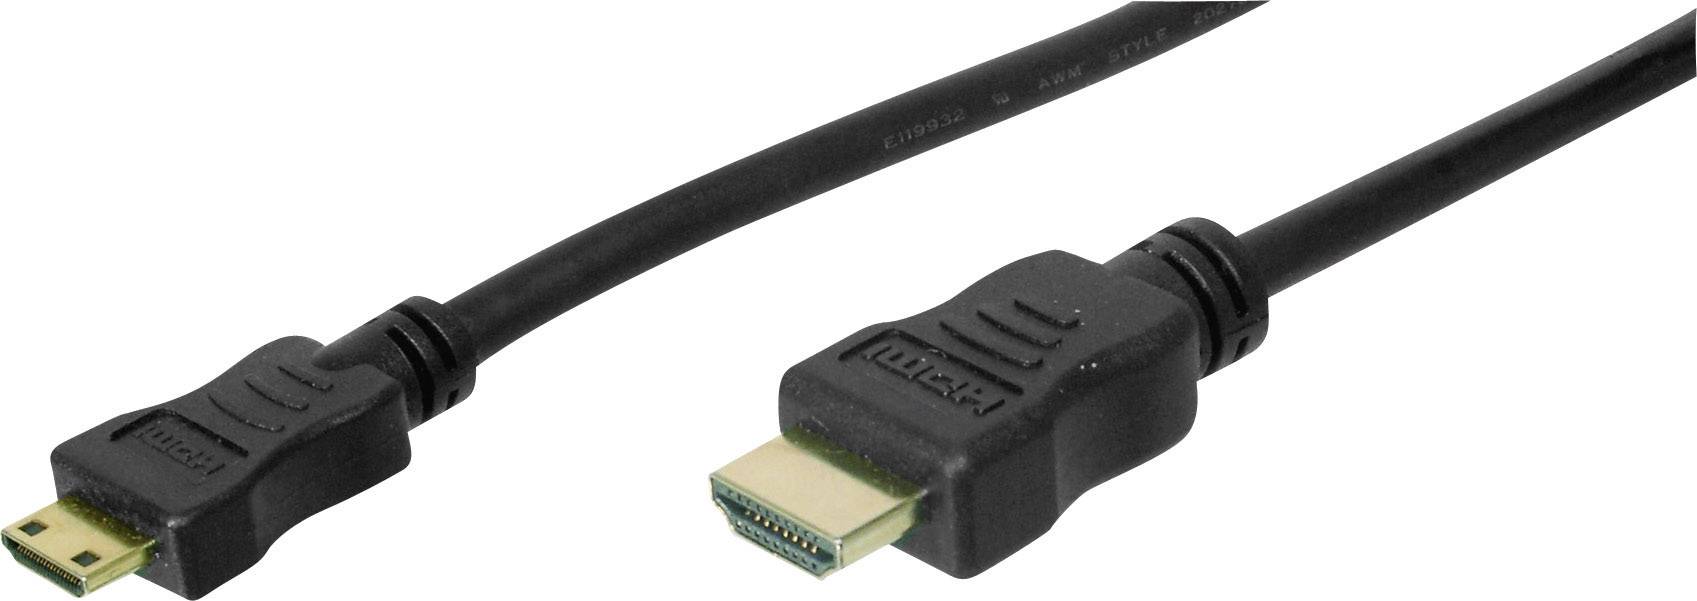 DIGITUS HDMI HIGH SPEED CONN. CABLE C-